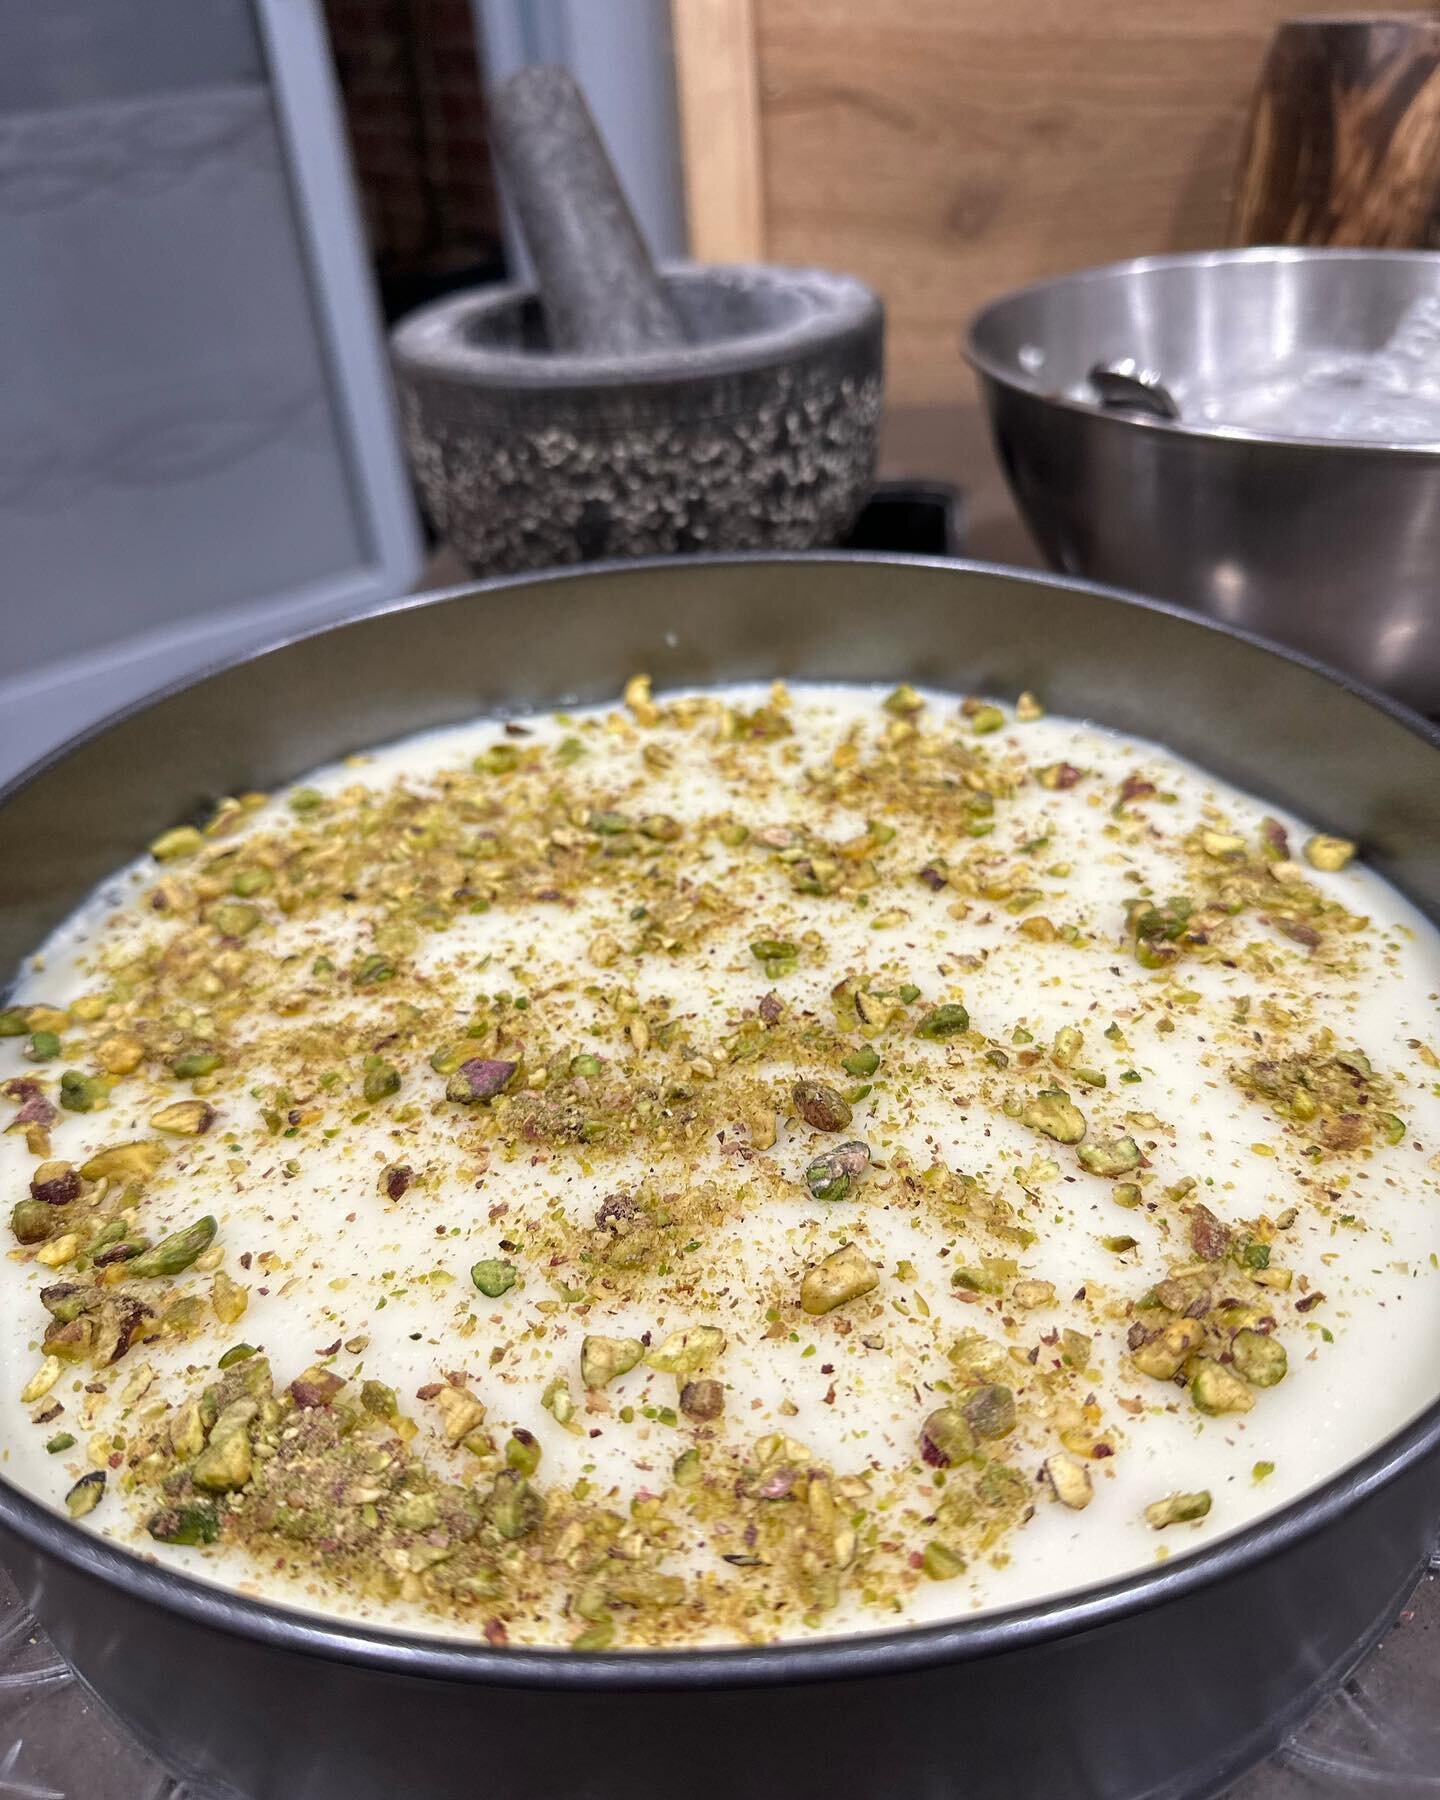 Lucky customer ordered a lovely Madlouka filled with Ashta clotted cream, topped with lots of crushed roasted pistachios, and drizzled with orange blossom and rose water syrup! 🥰🥰🥰

*
*
*

#food #foodporn #wedding #instafood #foodie #London #birth